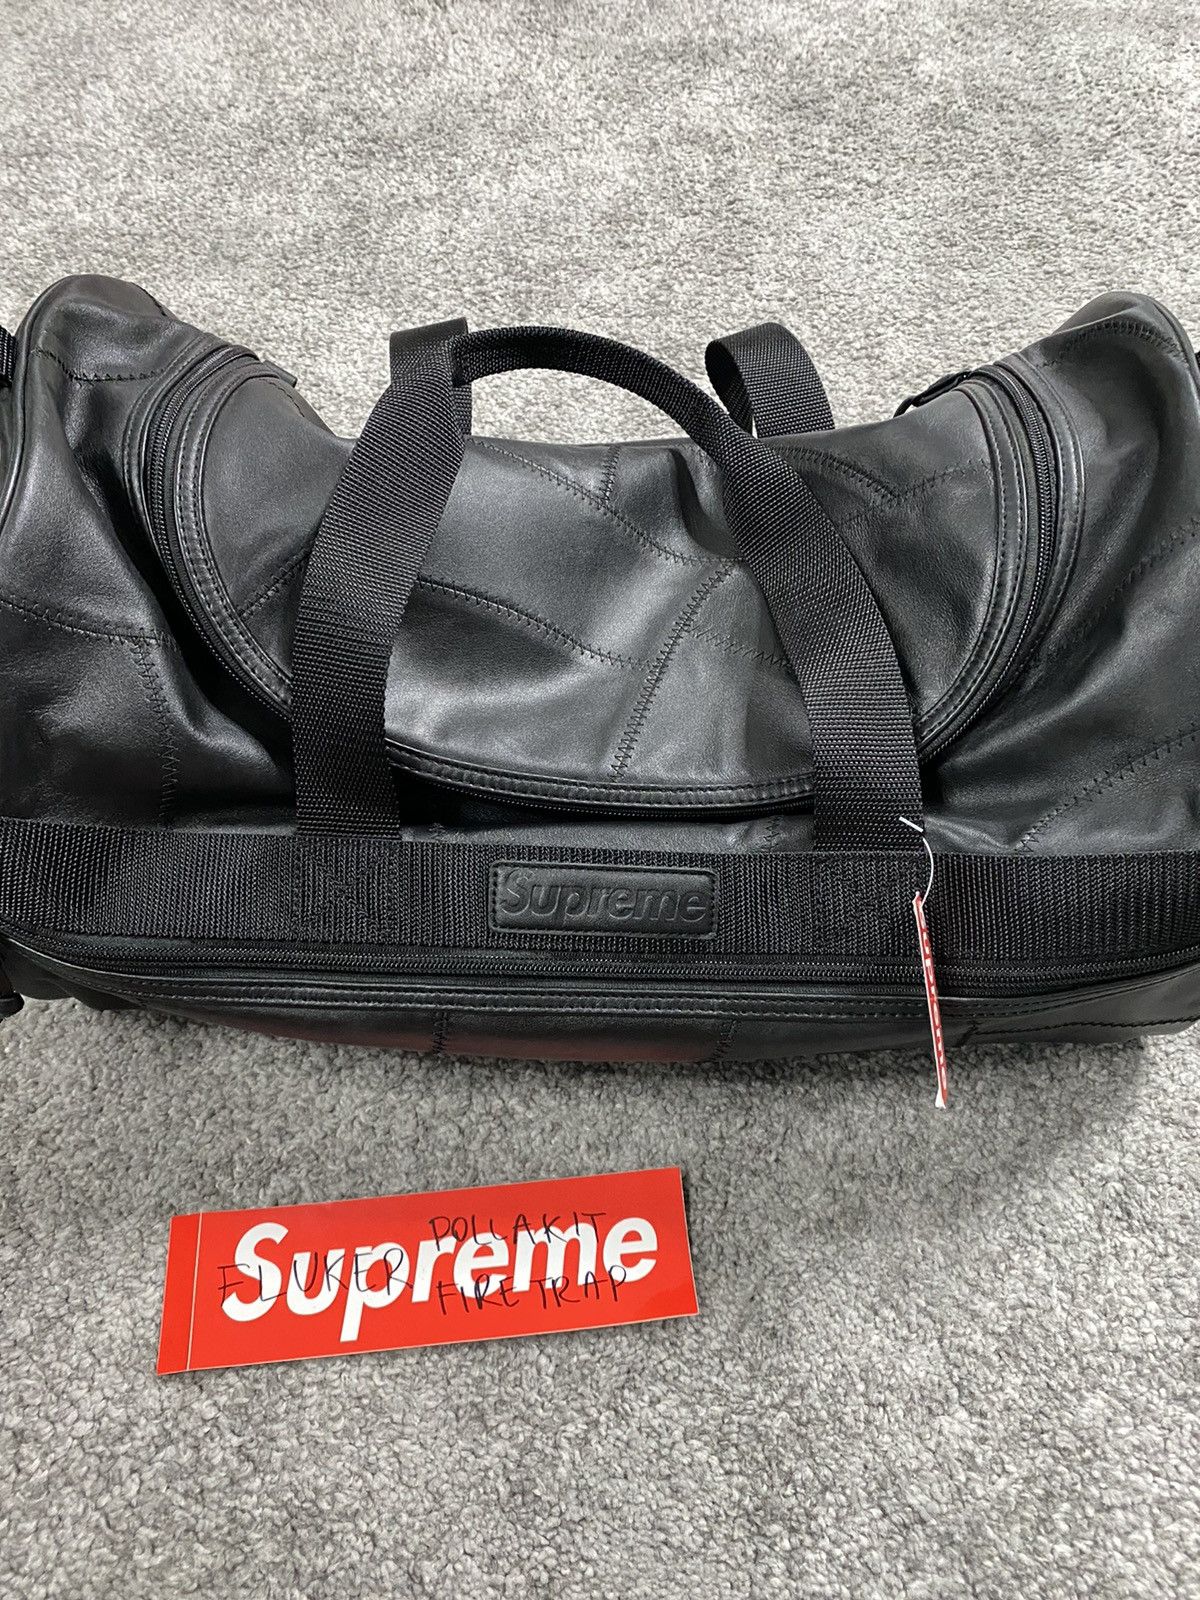 Supreme Supreme patchwork leather duffle bag FW19 | Grailed